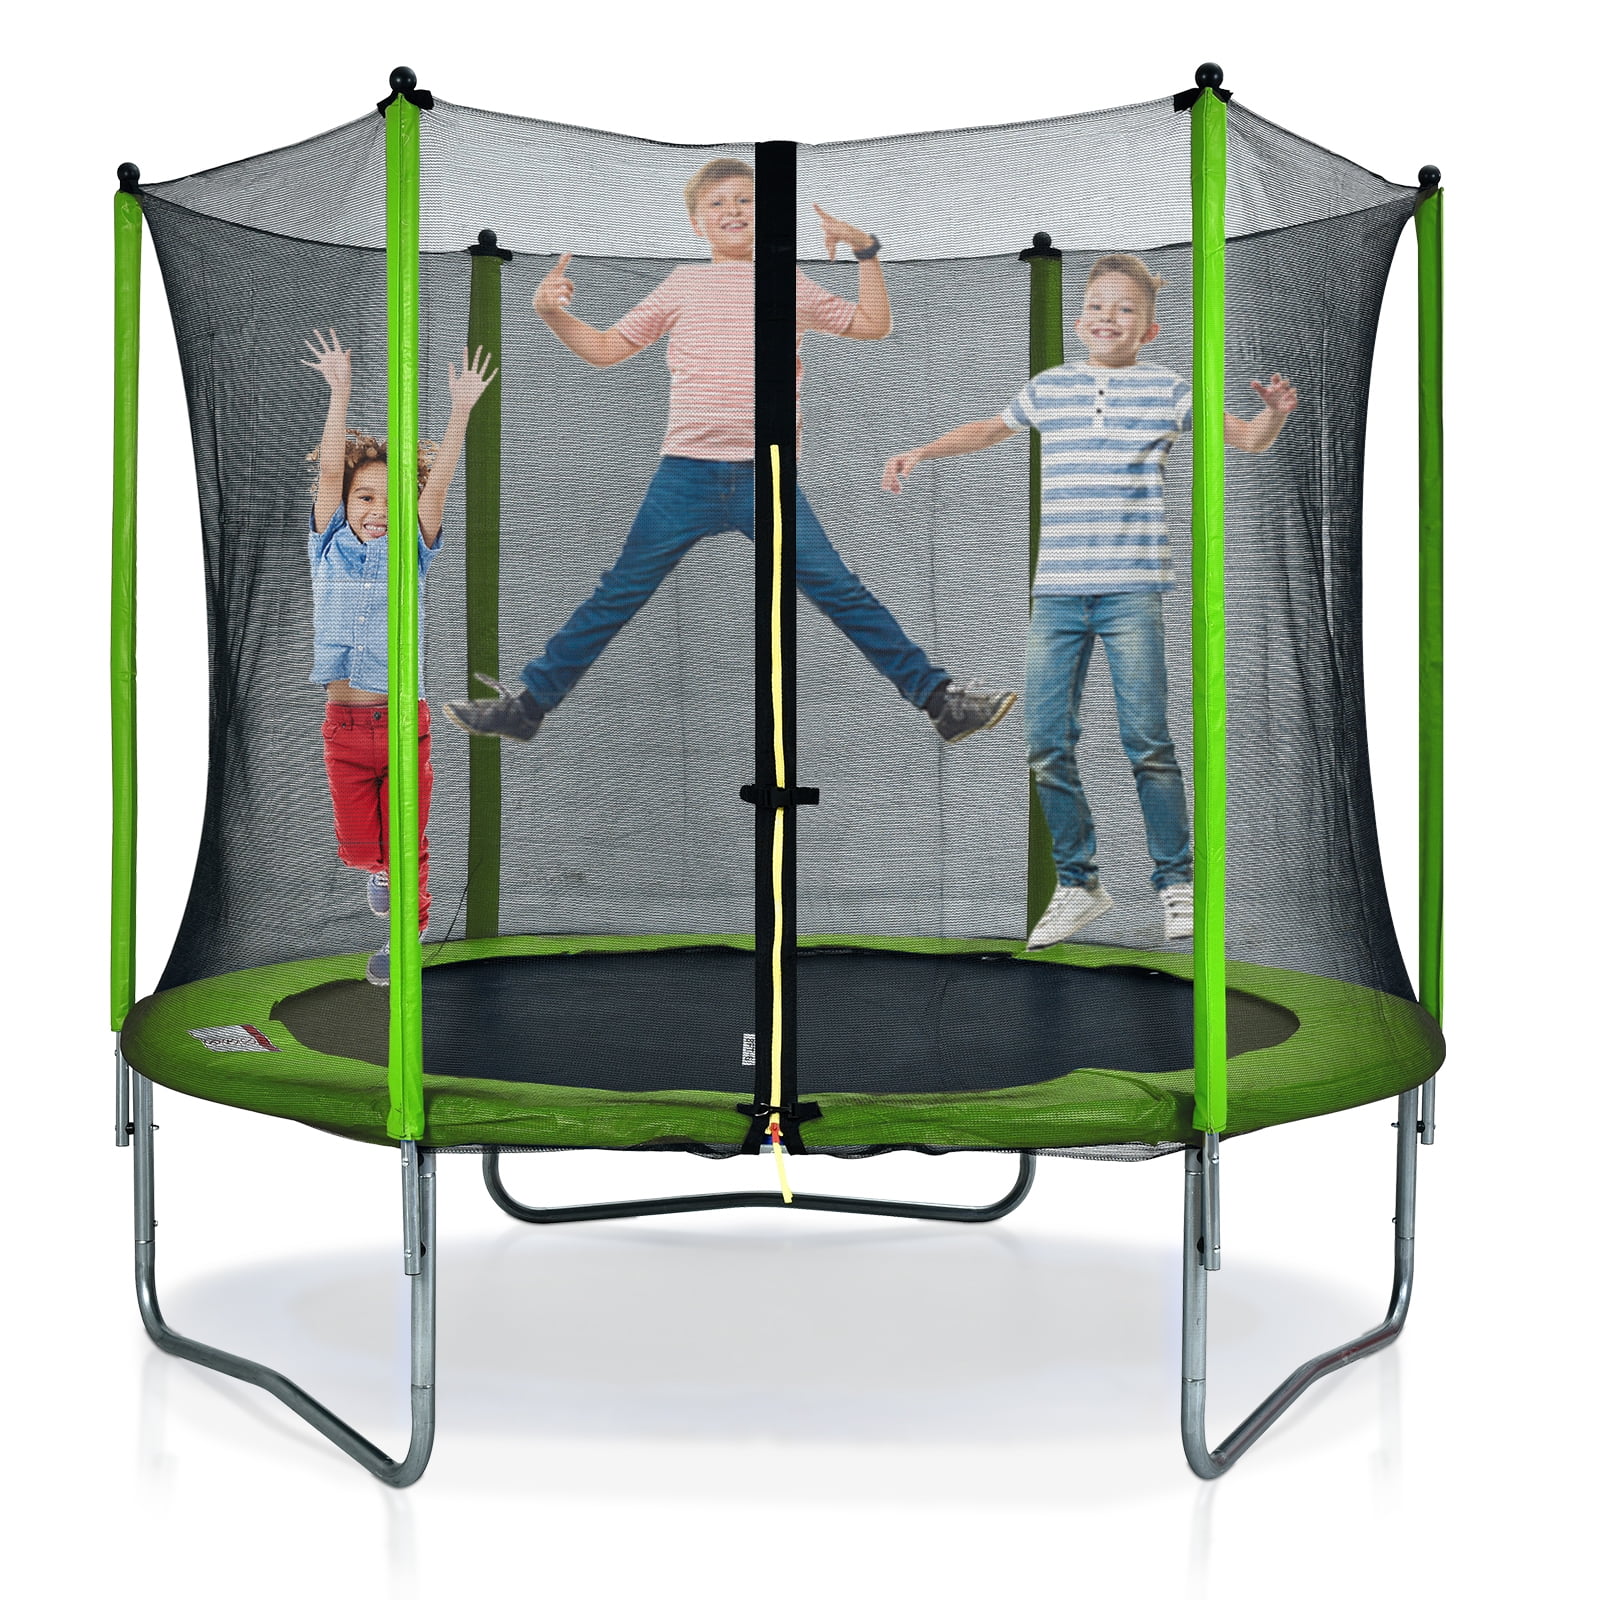 GoolRC 10FT Round Trampoline for Kids with Safety Enclosure Net, Outdoor Backyard Trampoline with Ladder, Green